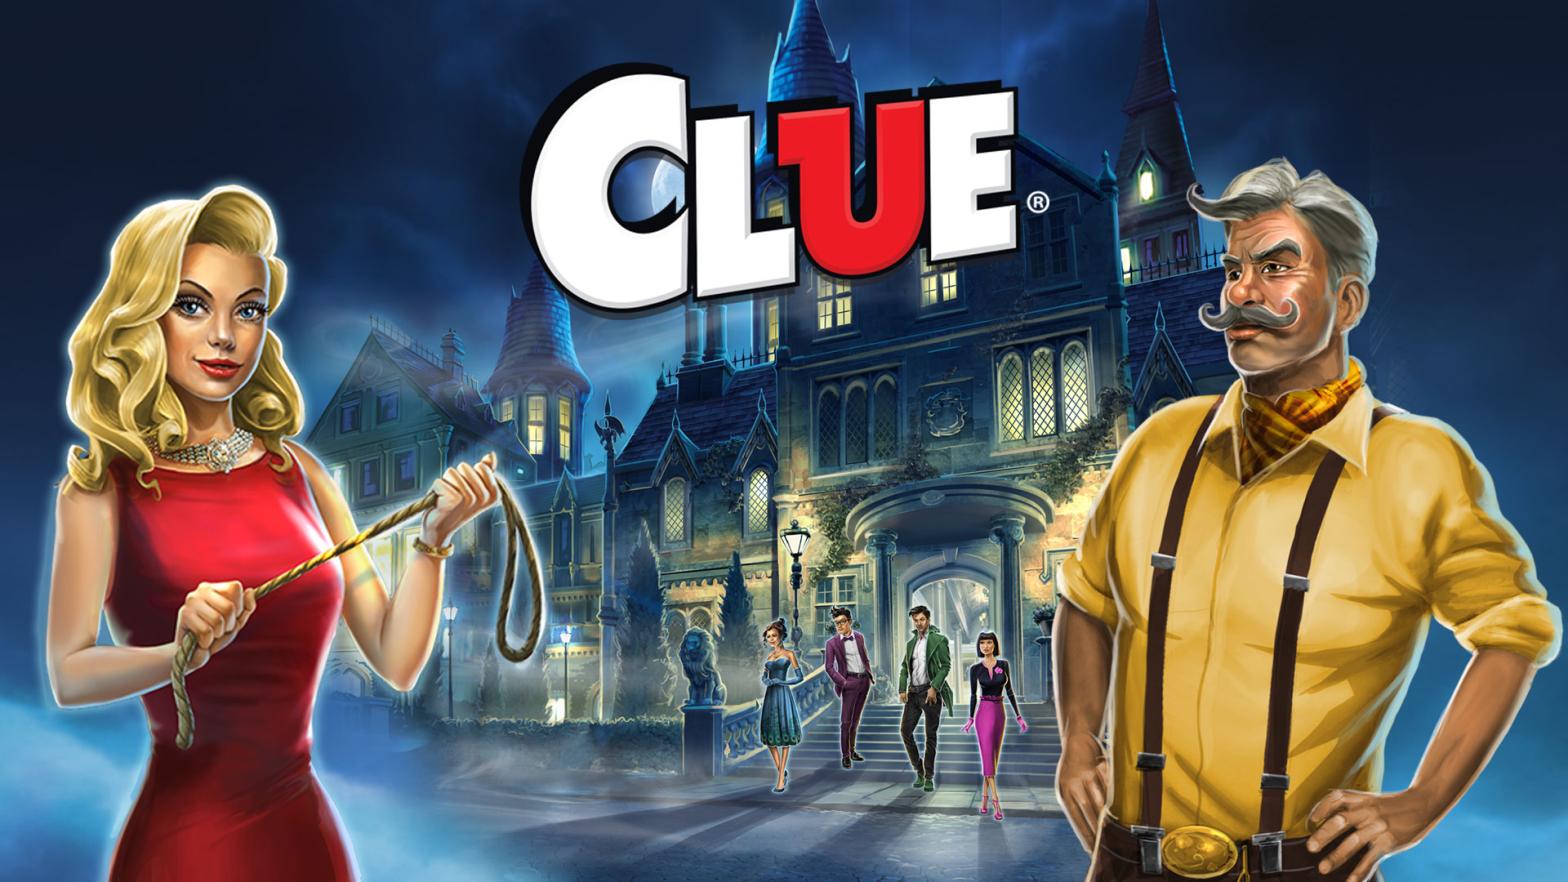 Clue, seen above as a Nintendo Switch game, is getting animated. (Image: Nintendo/Hasbro)